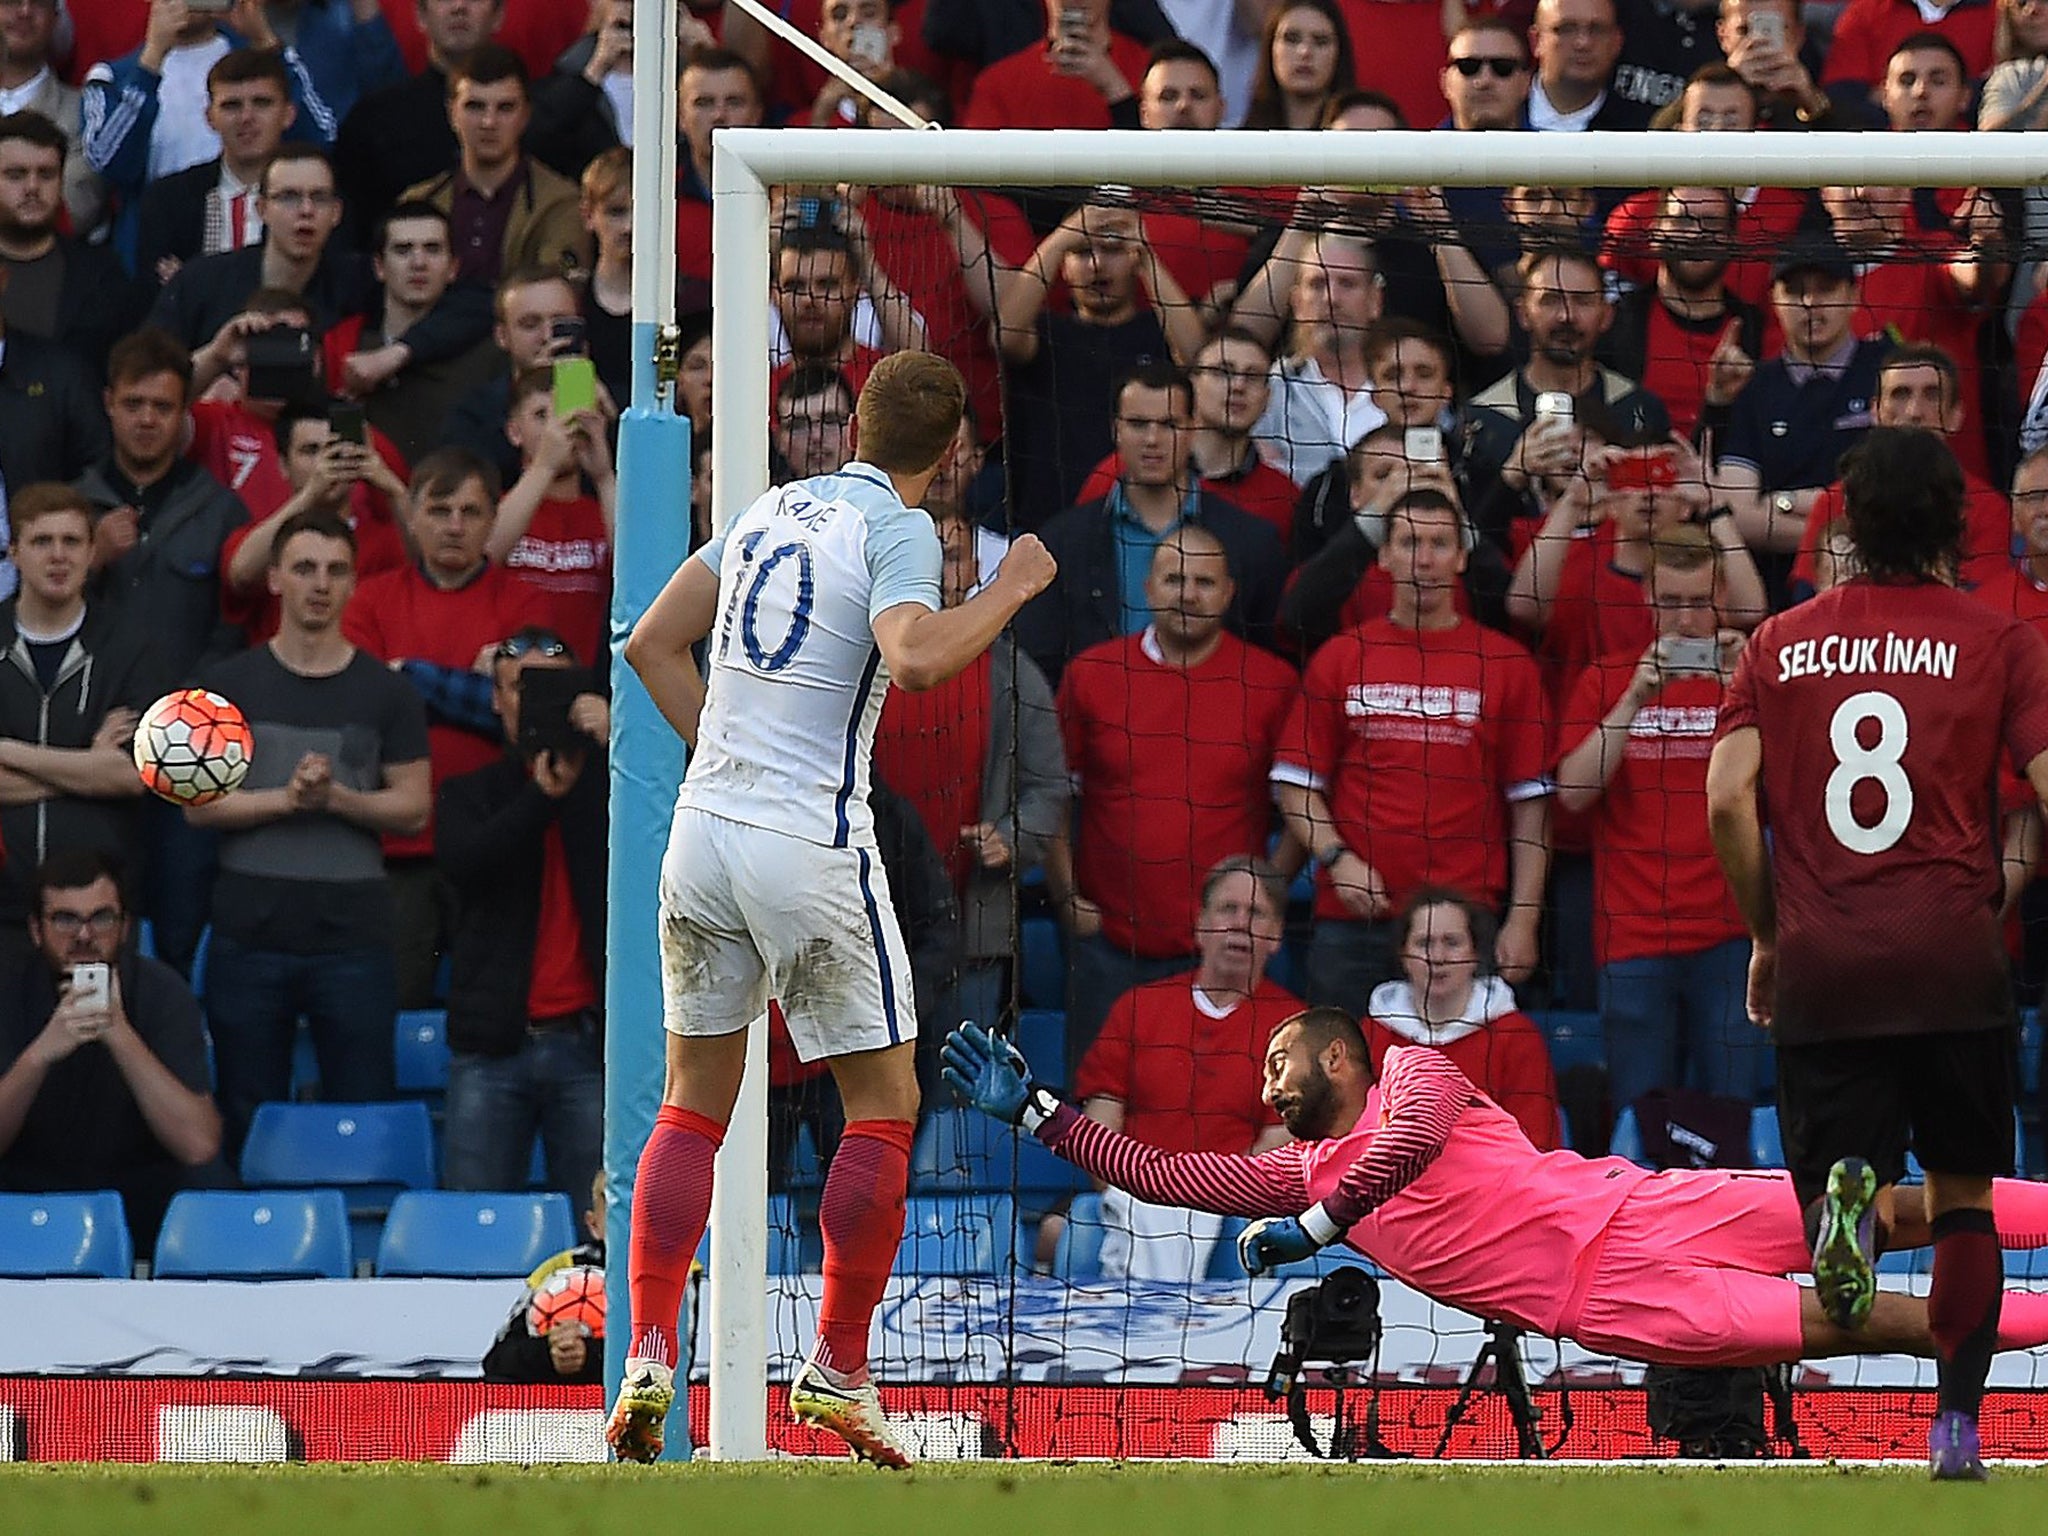 Kane struck the post with a second-half penalty